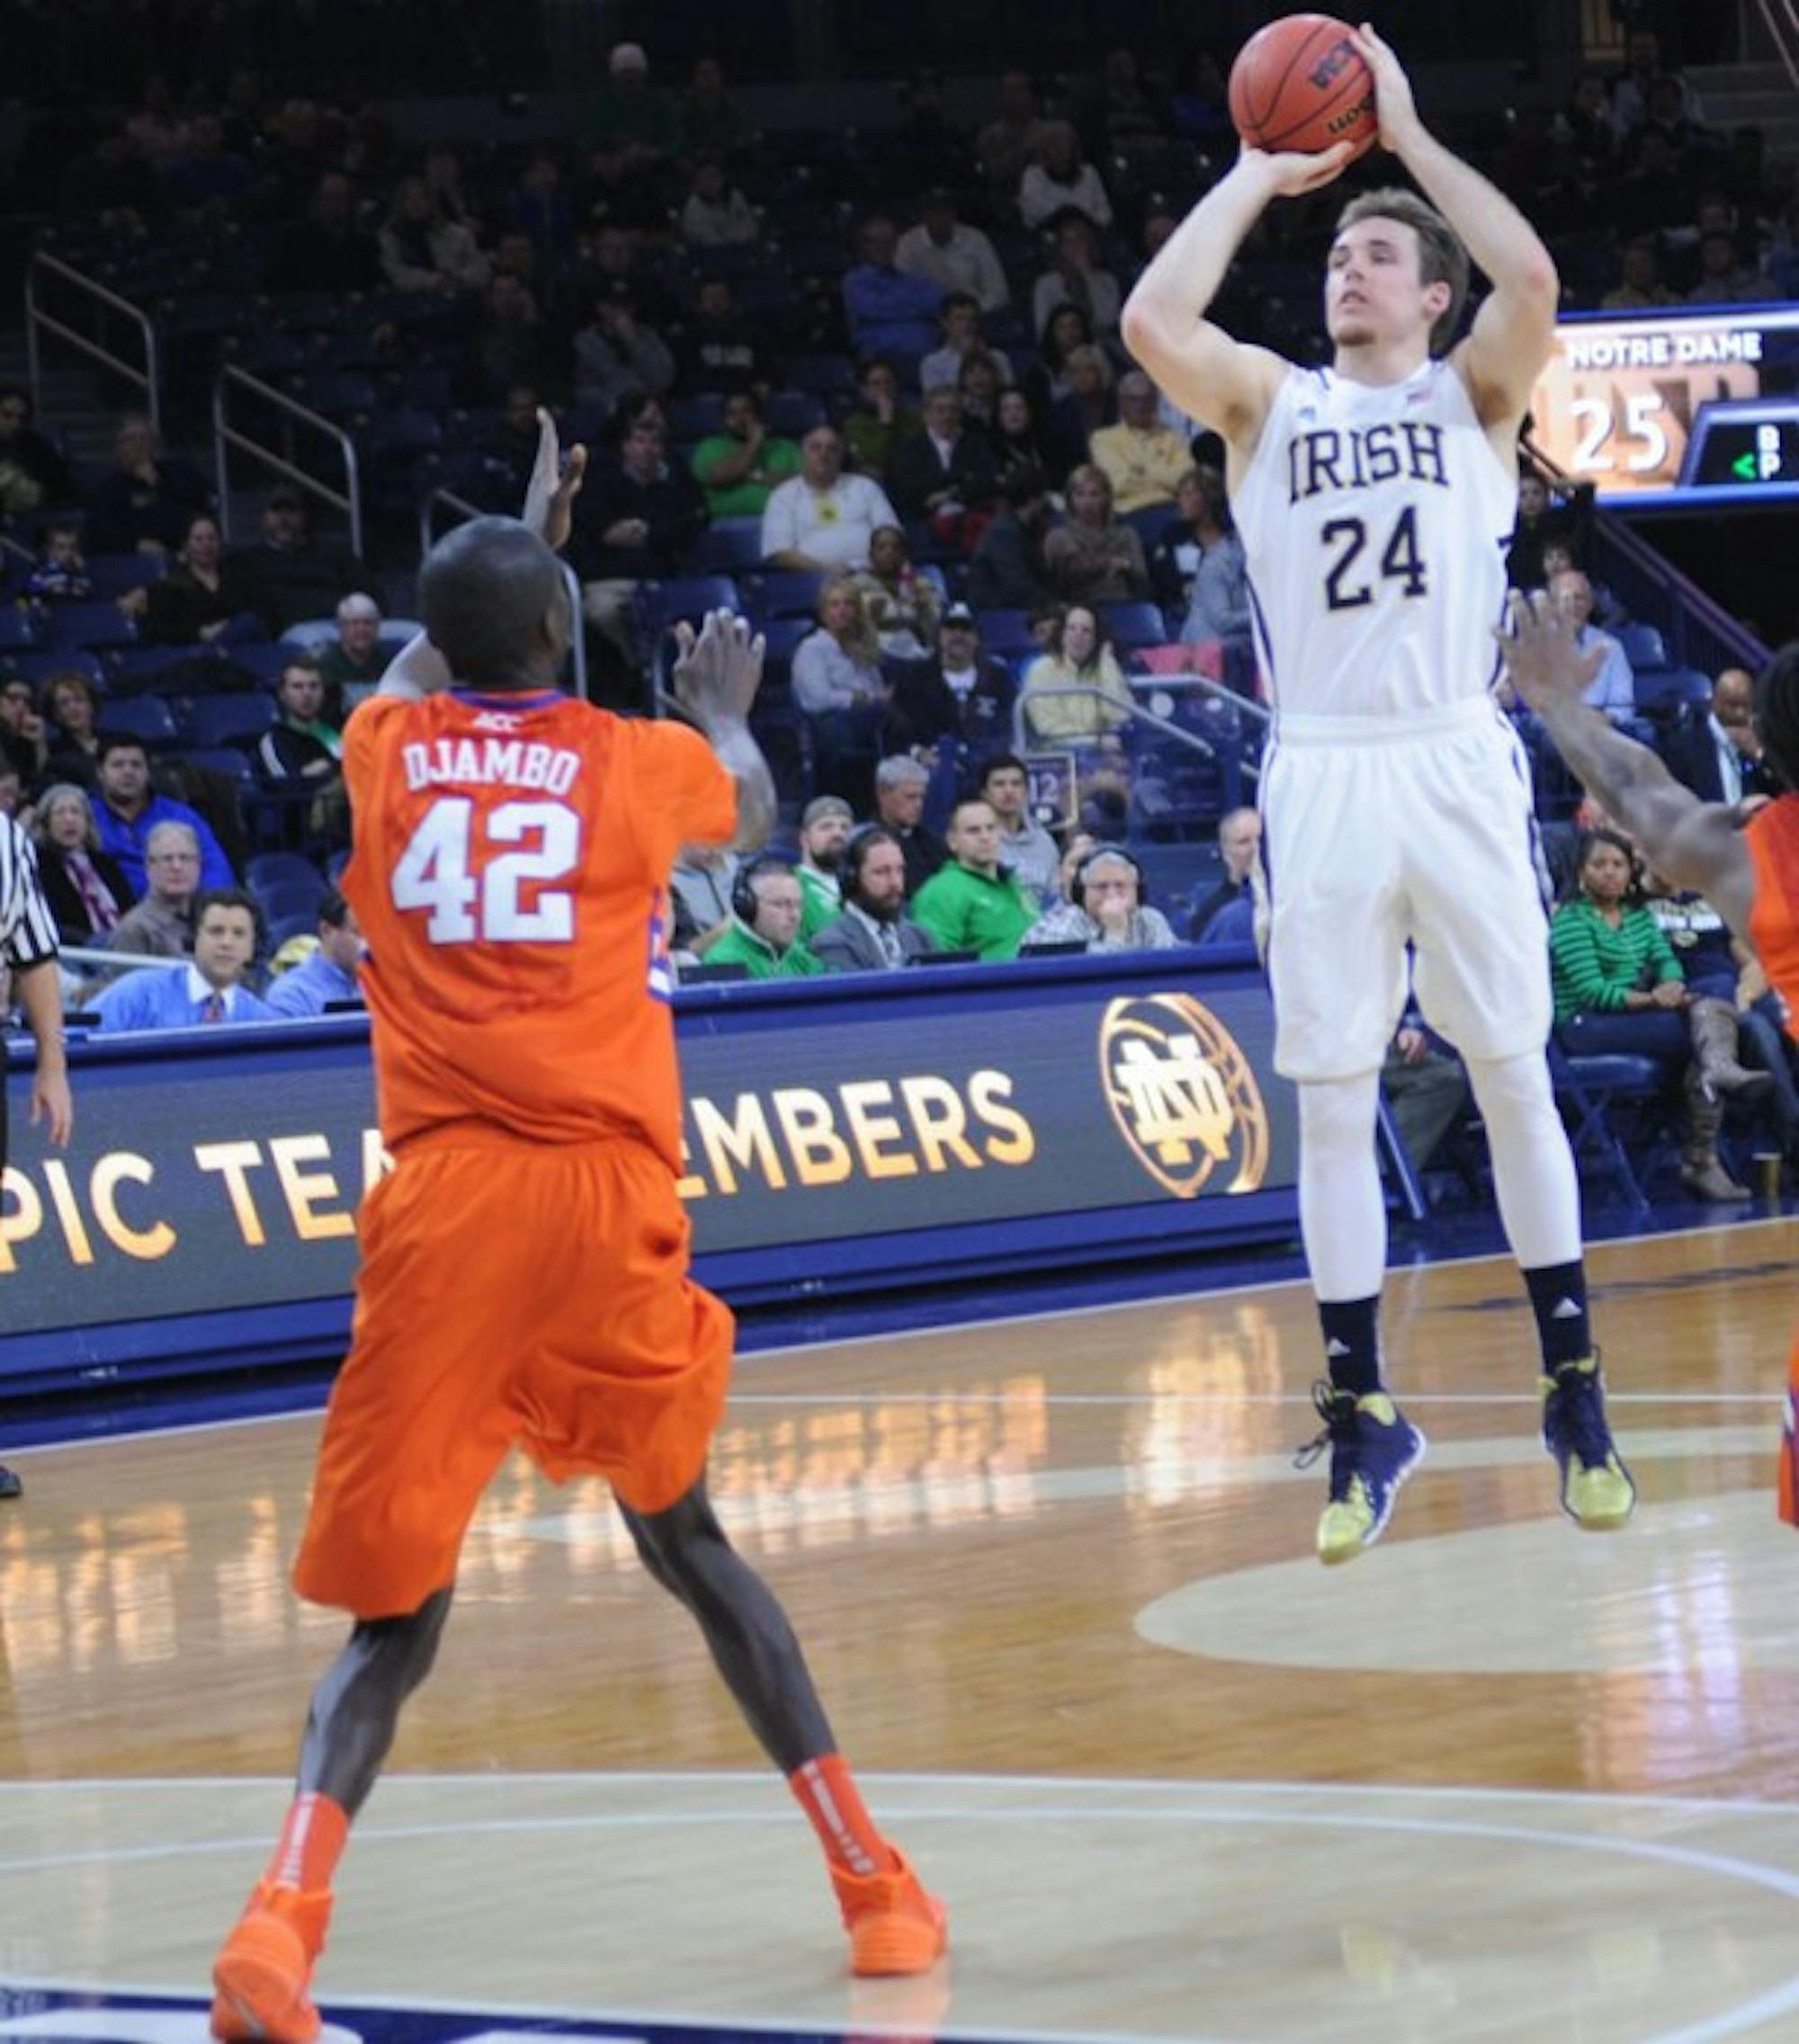 Irish junior guard Pat Connaughton rises up for a jumpshot in Notre Dame’s 68-64 win over Clemson on Feb. 11.